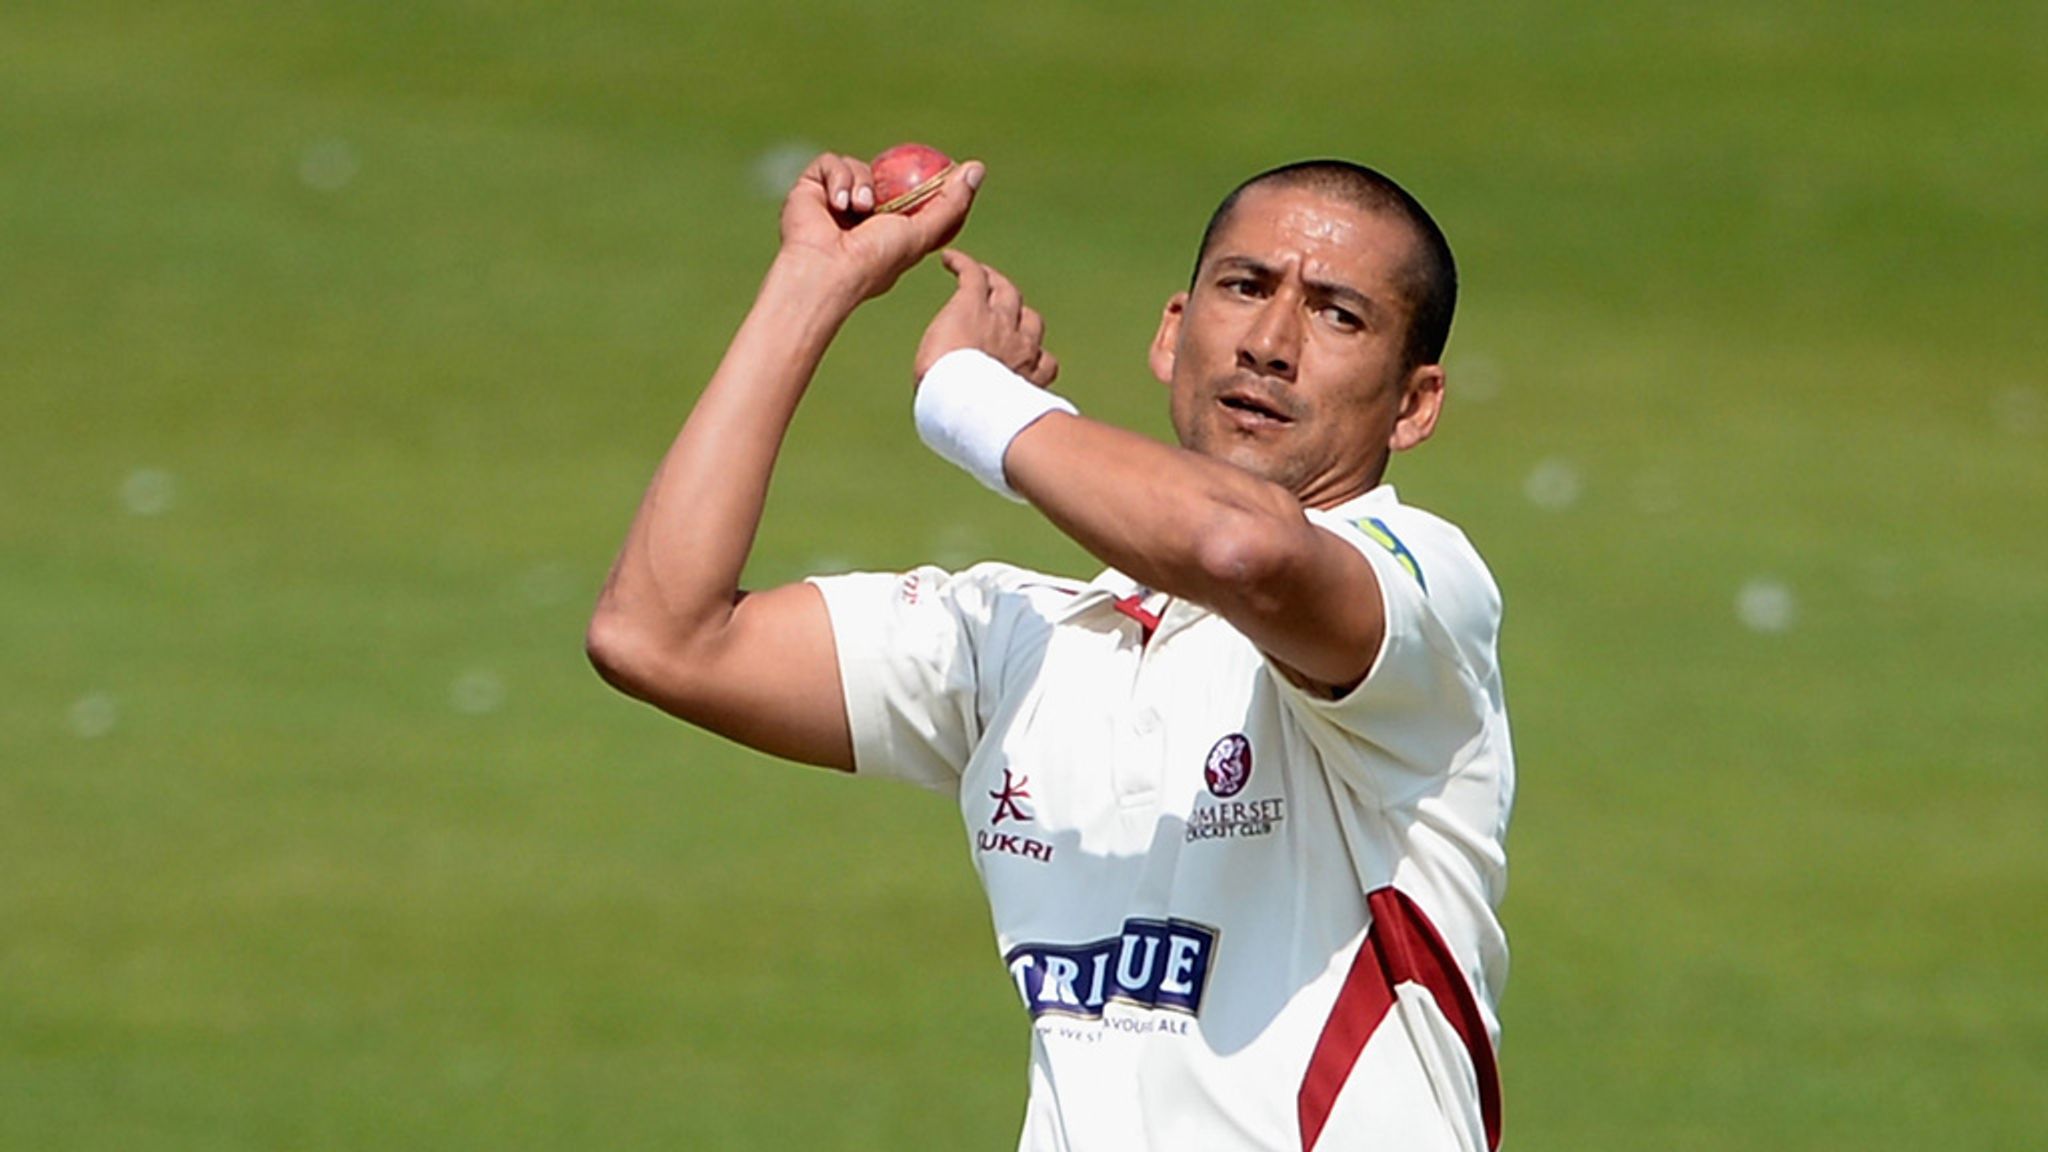 County cricket: Somerset fast bowler Alfonso Thomas hit with three ...